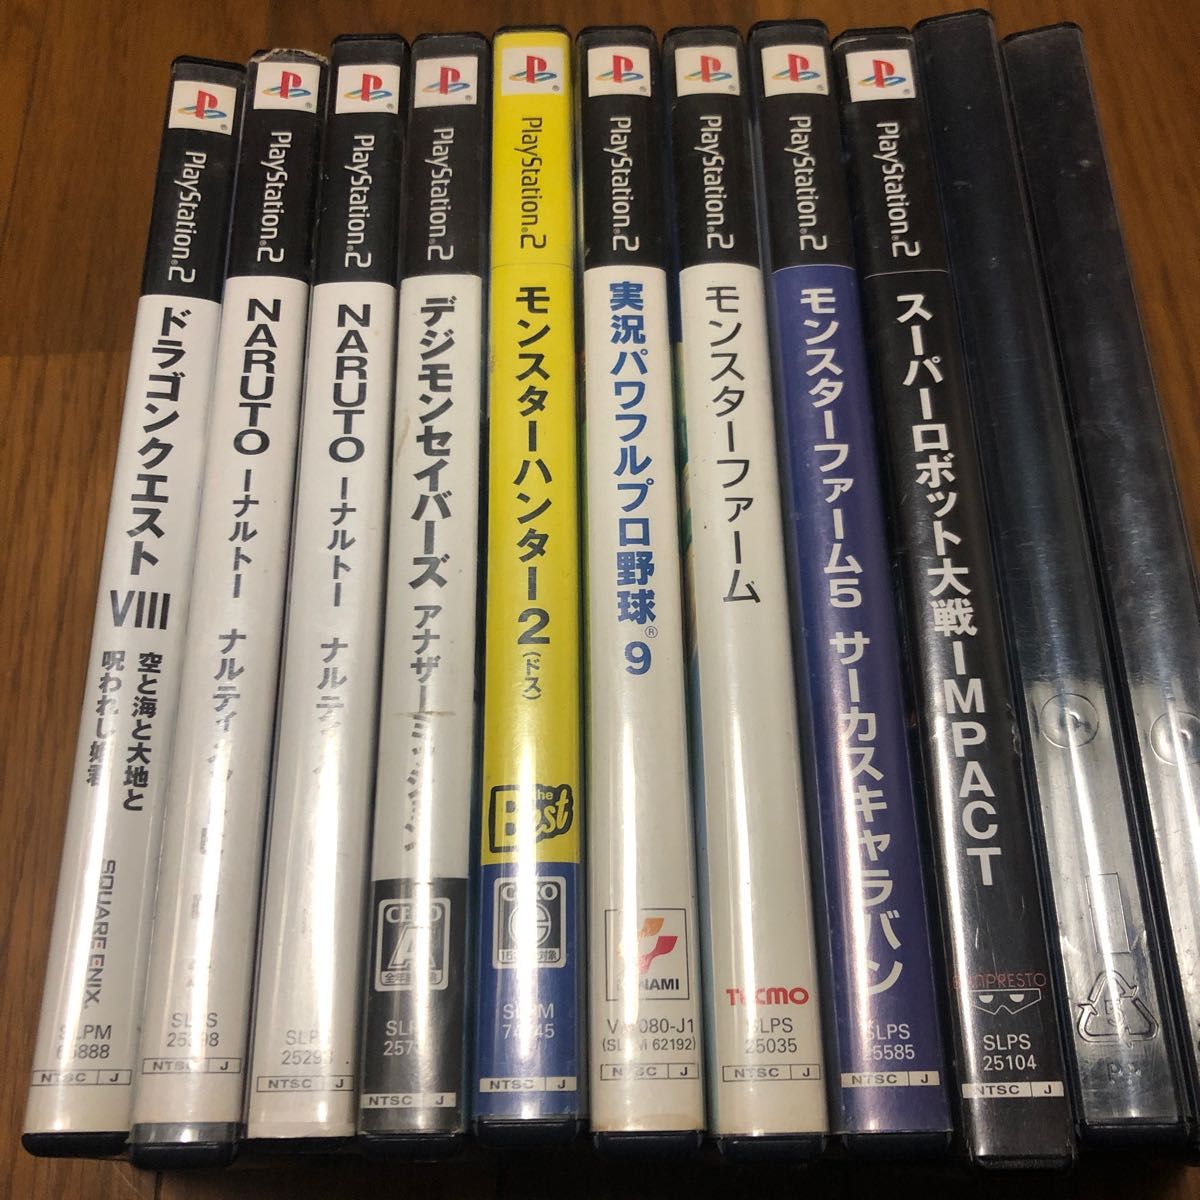 PS2ソフト まとめ売り 11点セット バラ売り可(300円